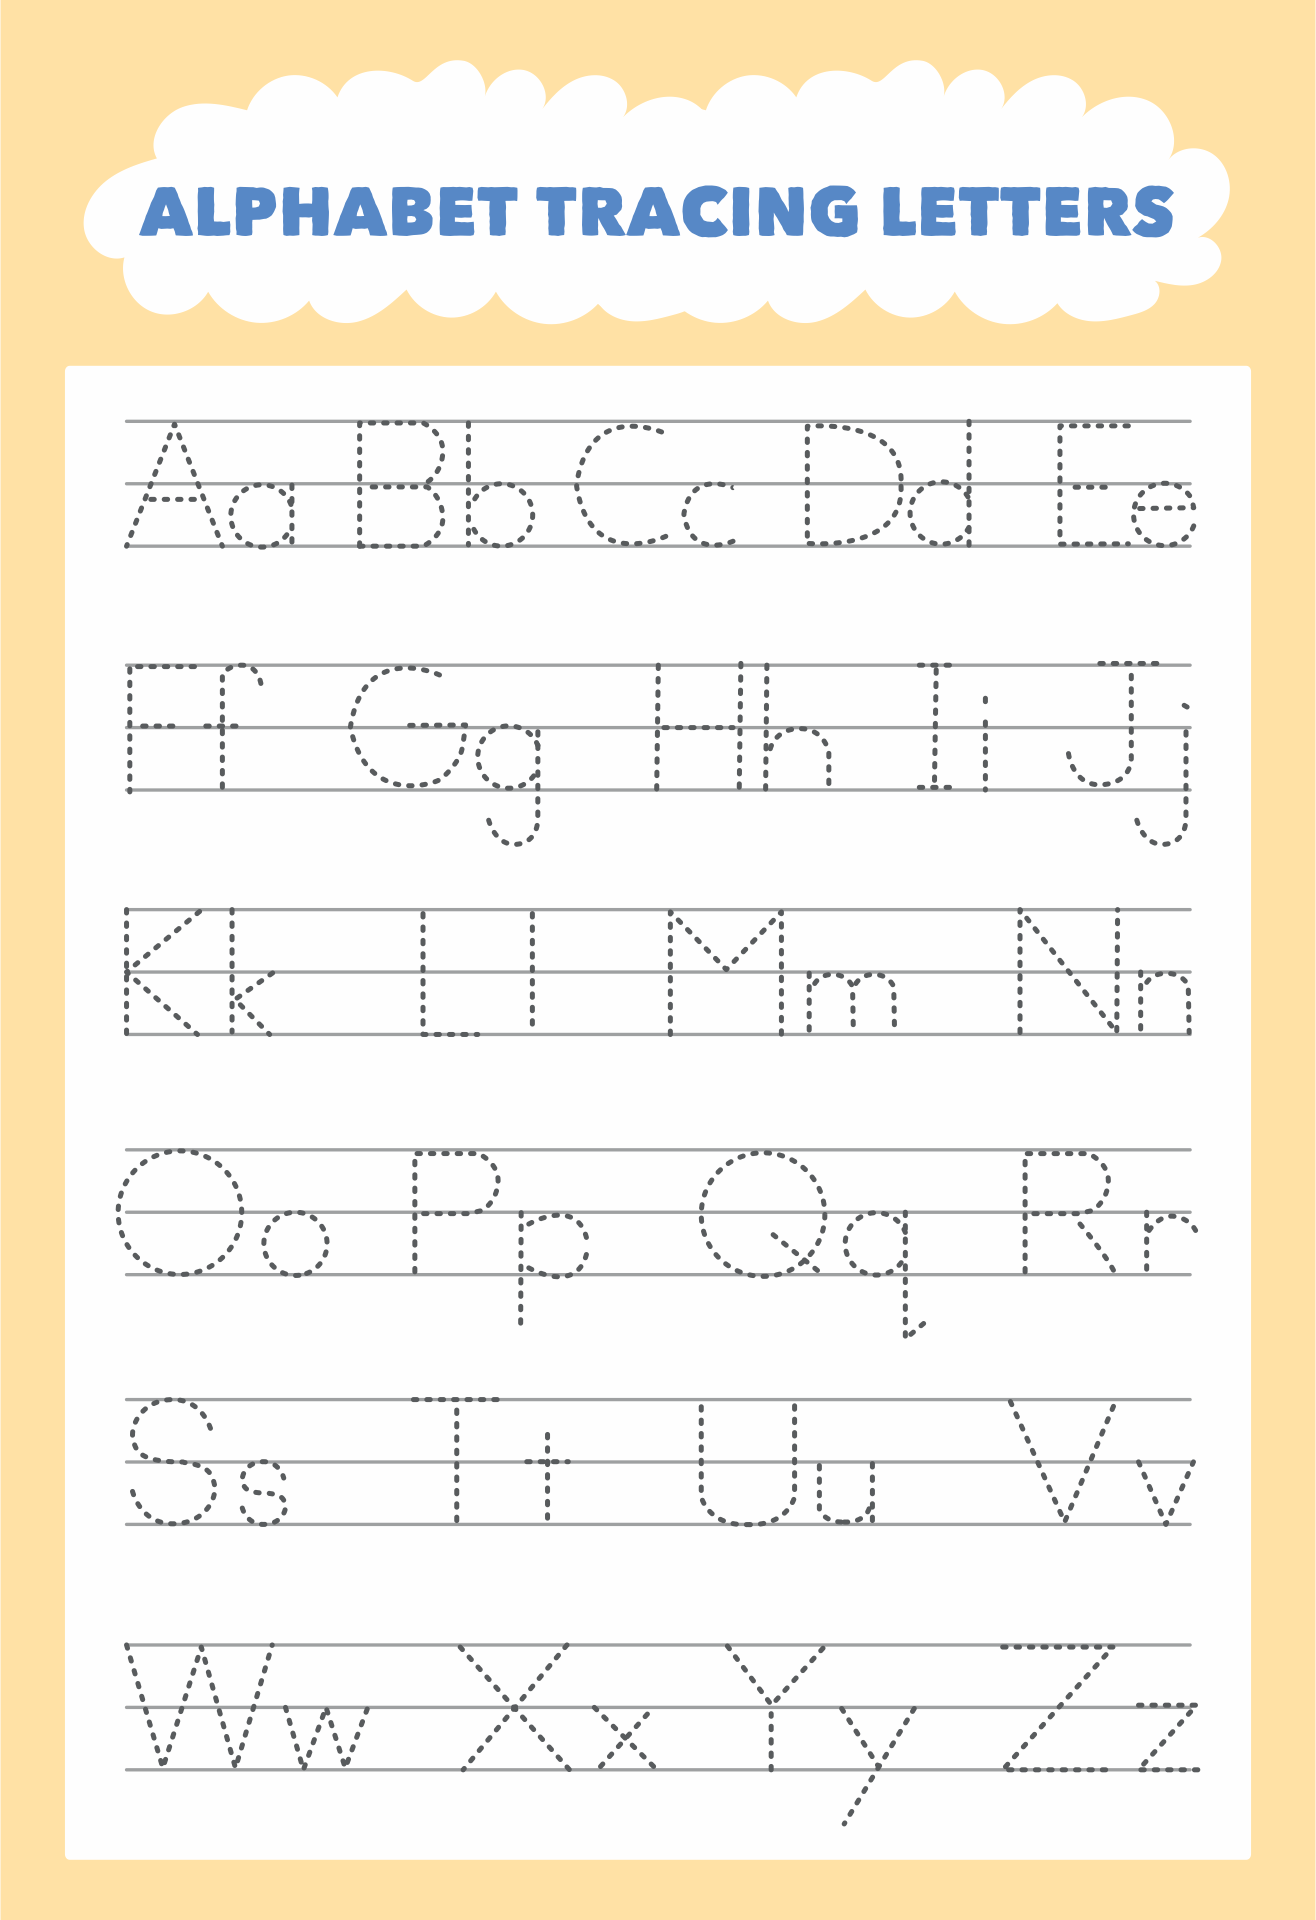 traceable-letters-printable-customize-and-print